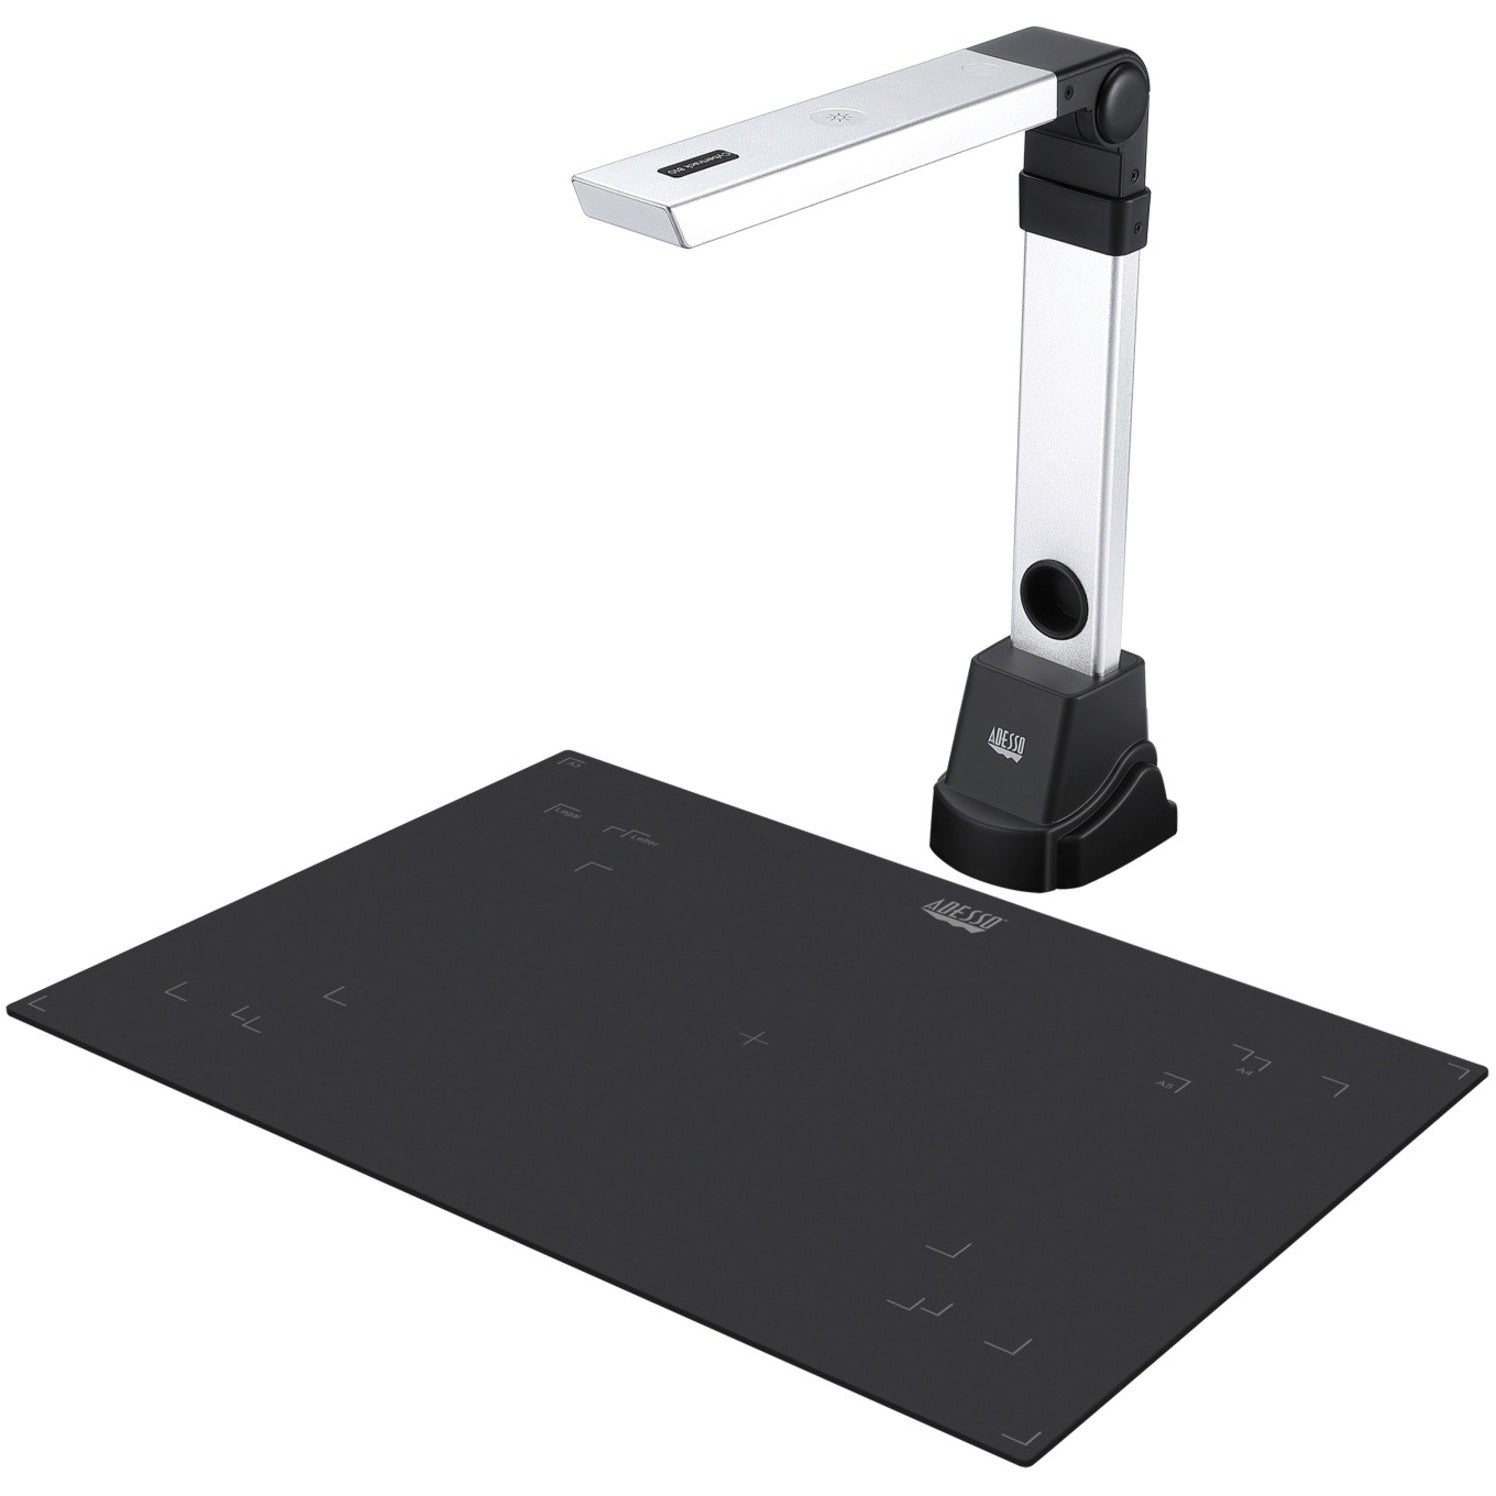 Adesso Cybertrack 820 8 Megapixel Fixed-Focus A3 Document Camera Scanner with OCR Function